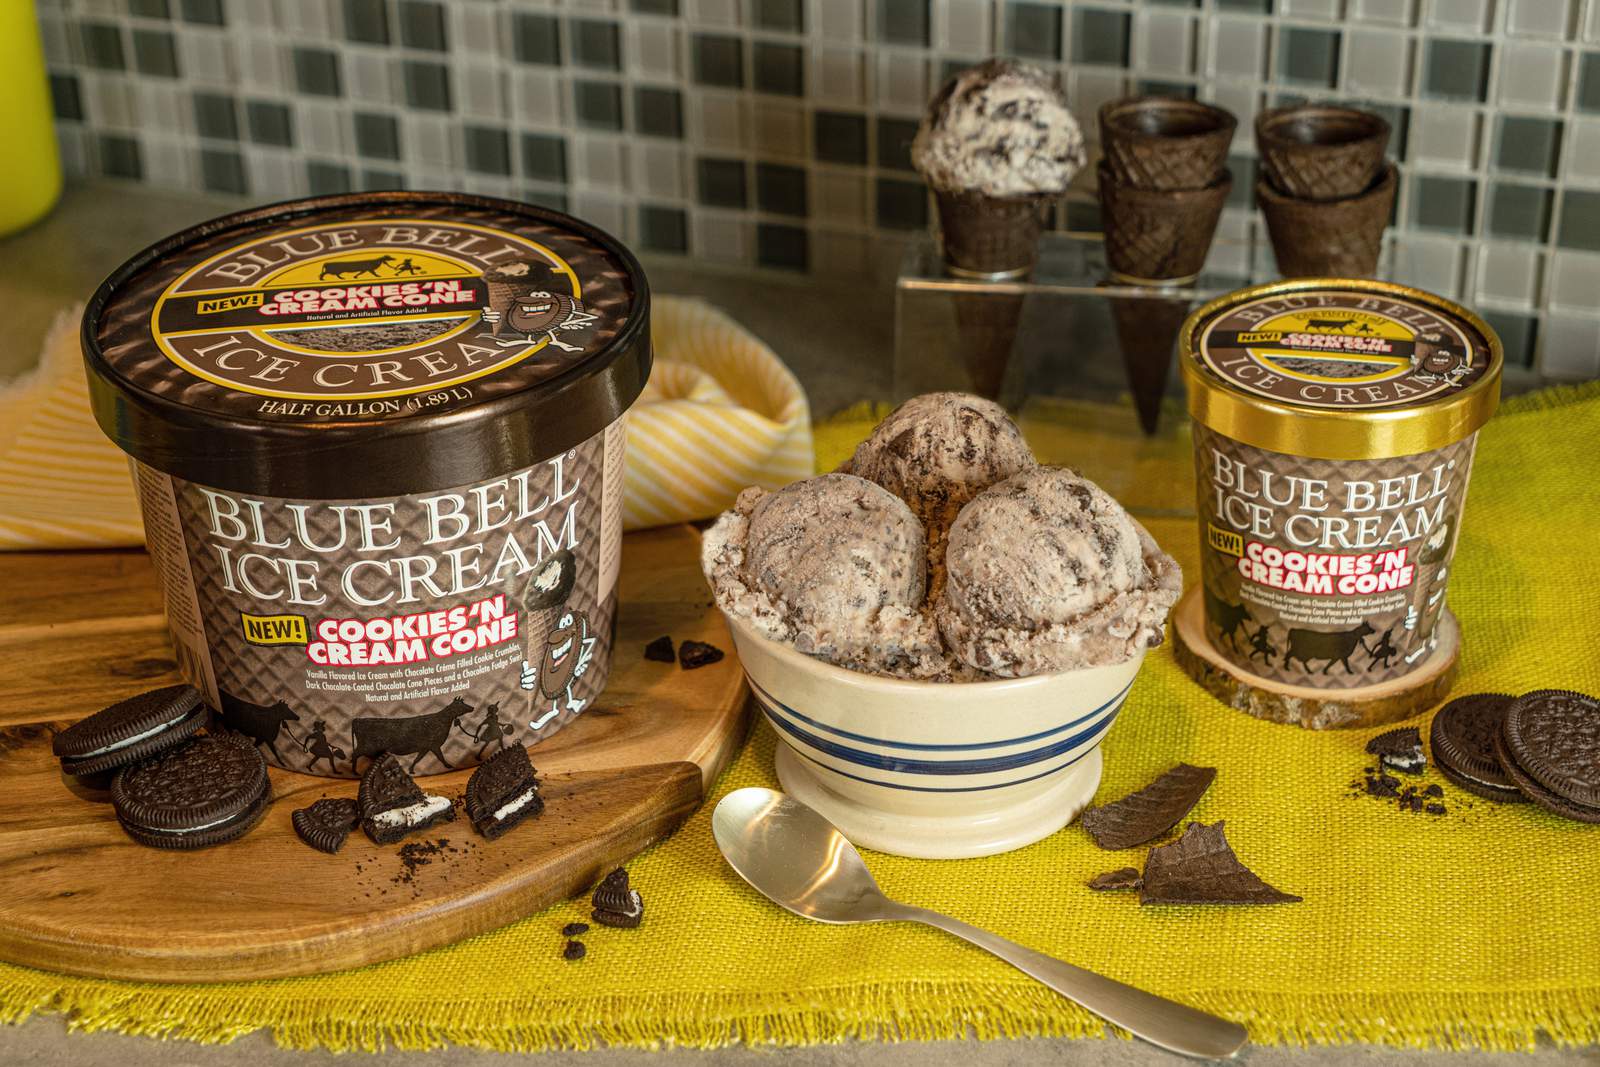 Blue Bell debuting new flavor, Cookies ‘n Cream Cone, that’s perfect for chocolate fans